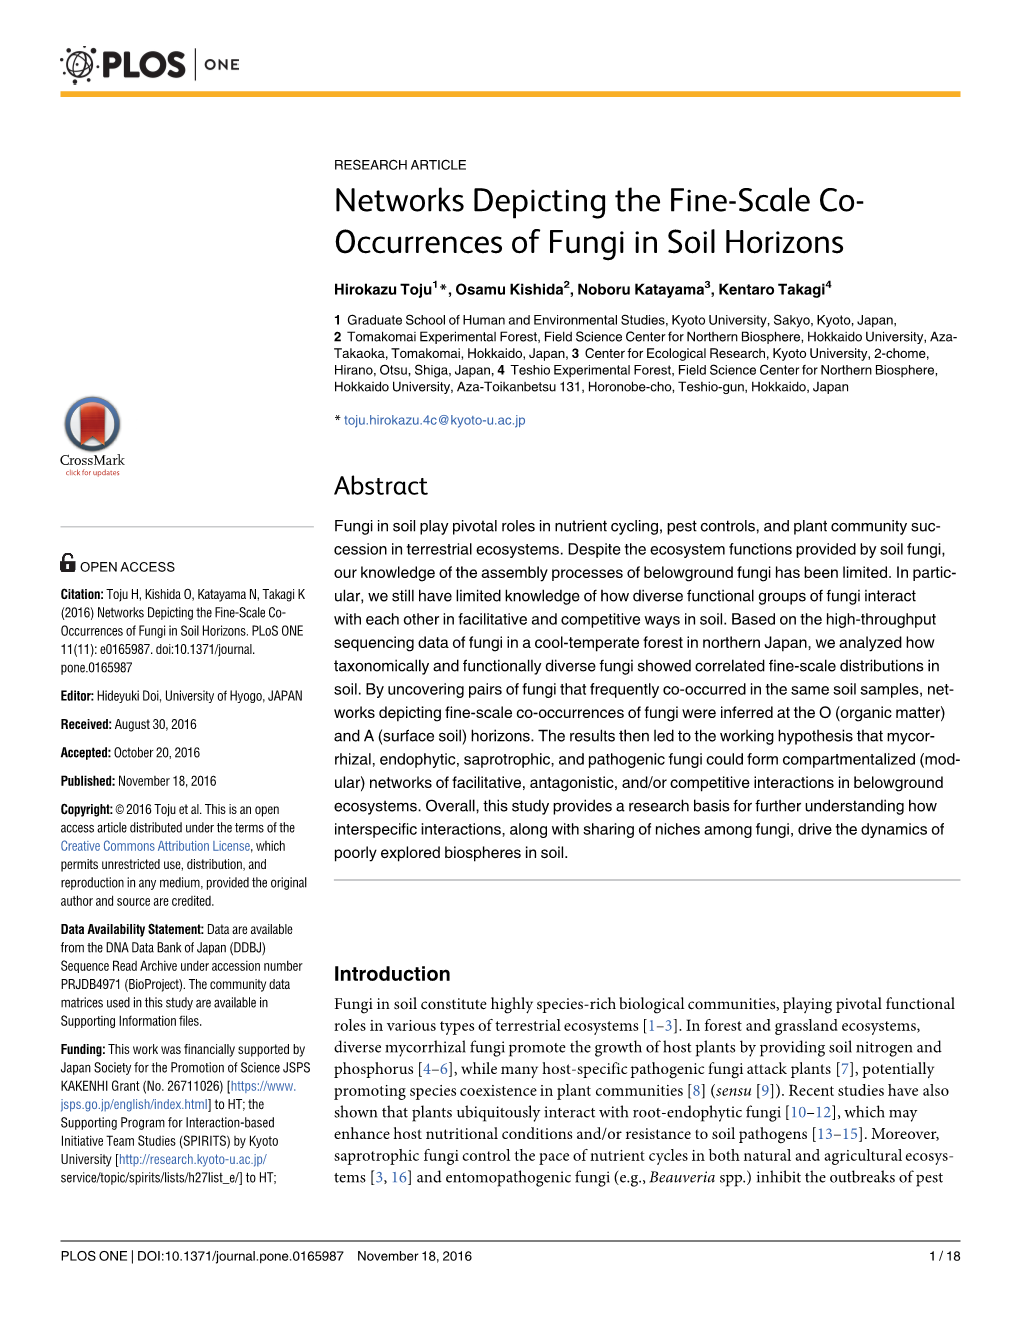 Networks Depicting the Fine-Scale Co-Occurrences of Fungi in Soil